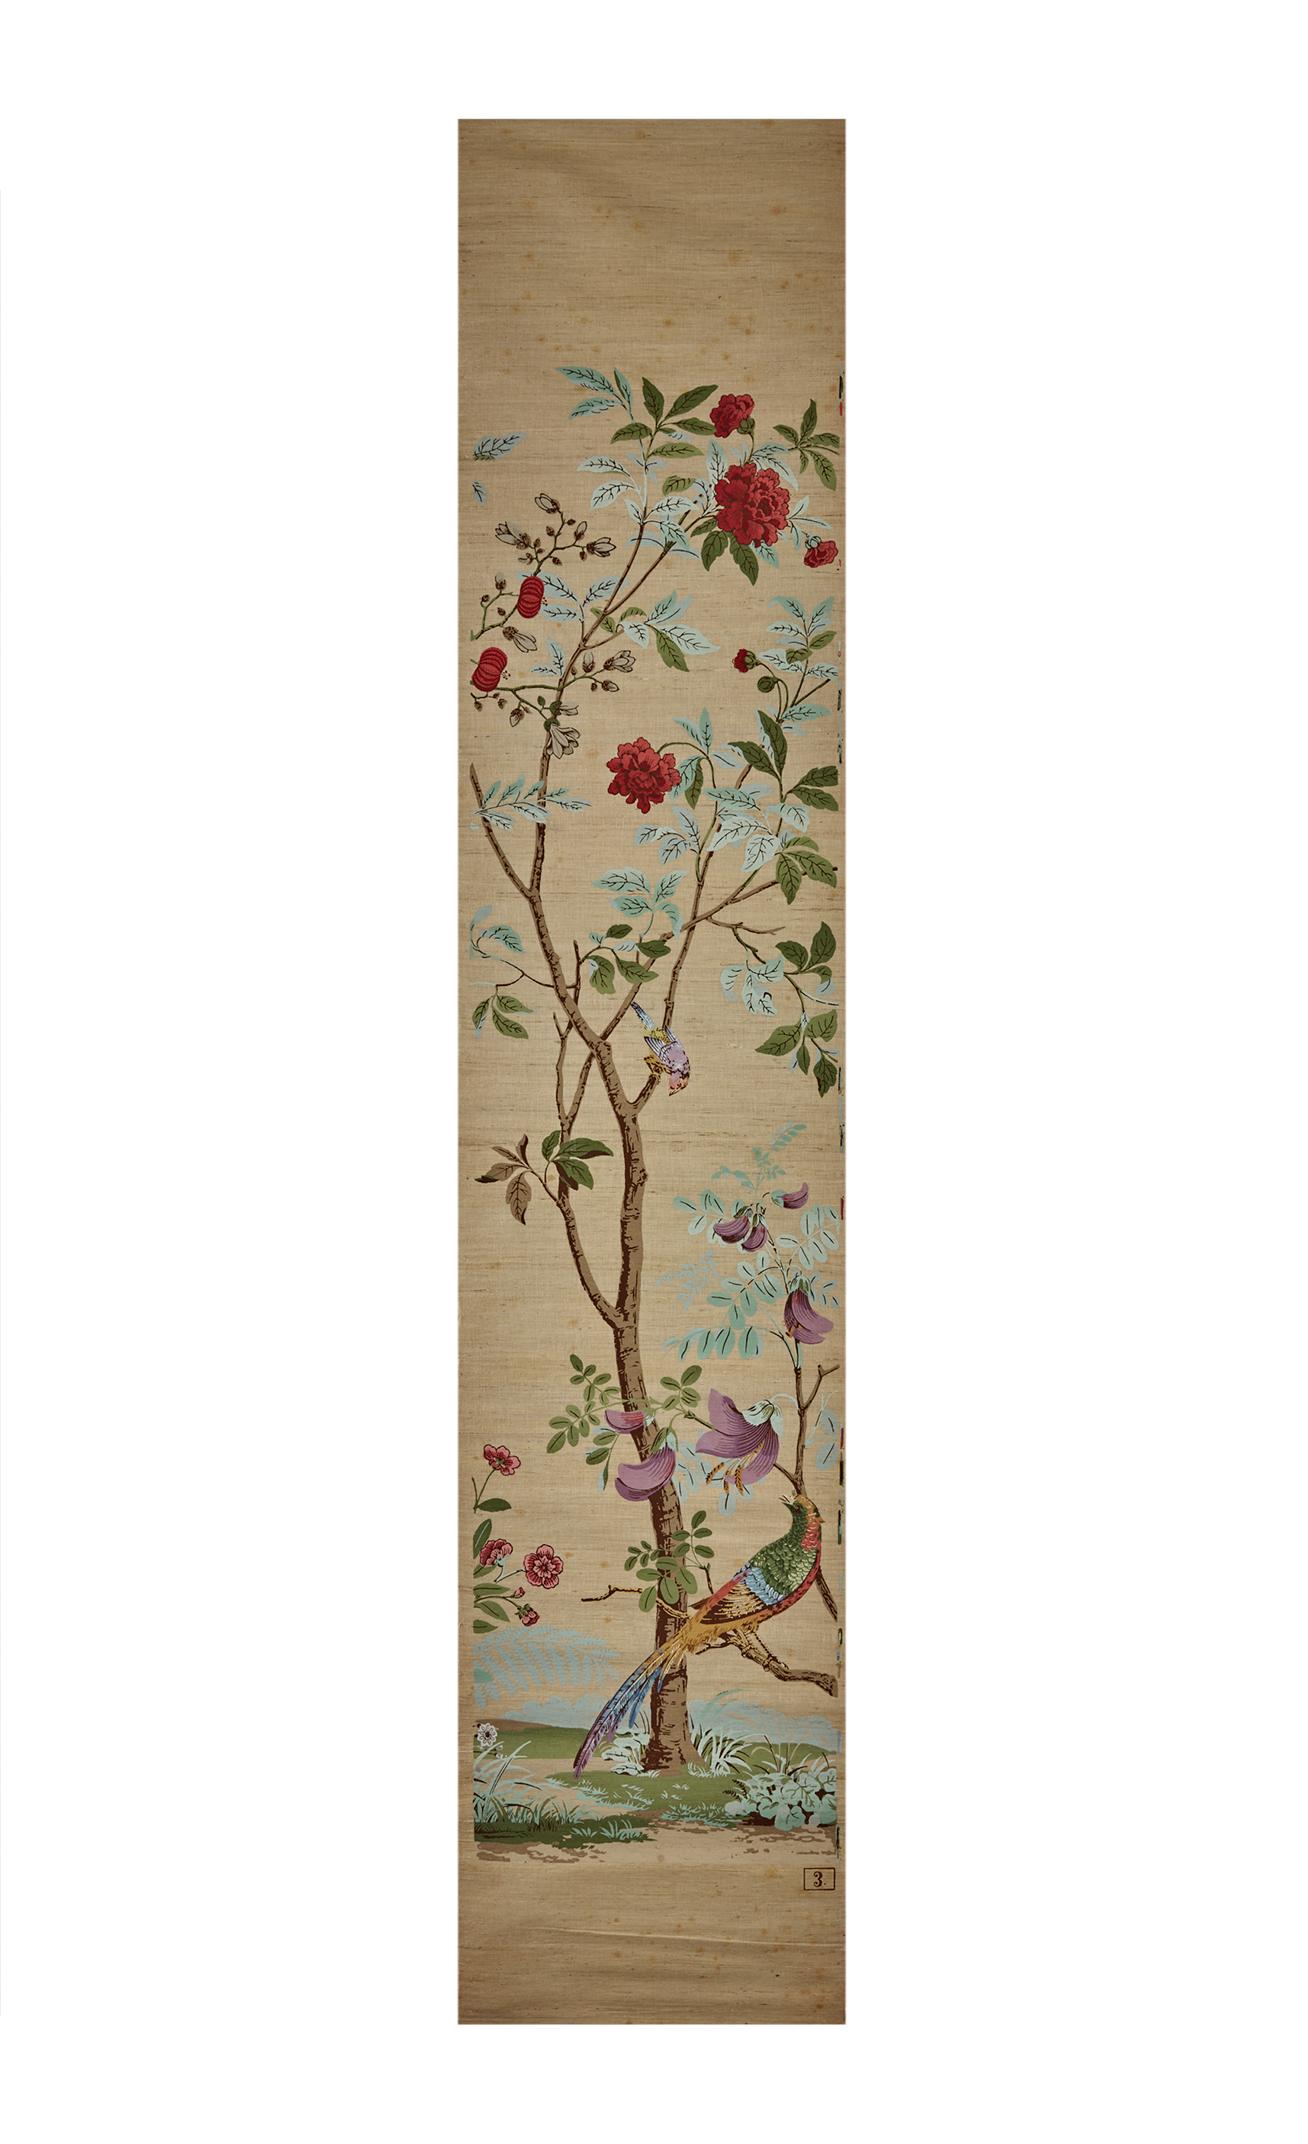 Zuber, 'Decor Chinois' Hand Wood Blocked on Grasscloth Scenic Wallpaper For Sale 3